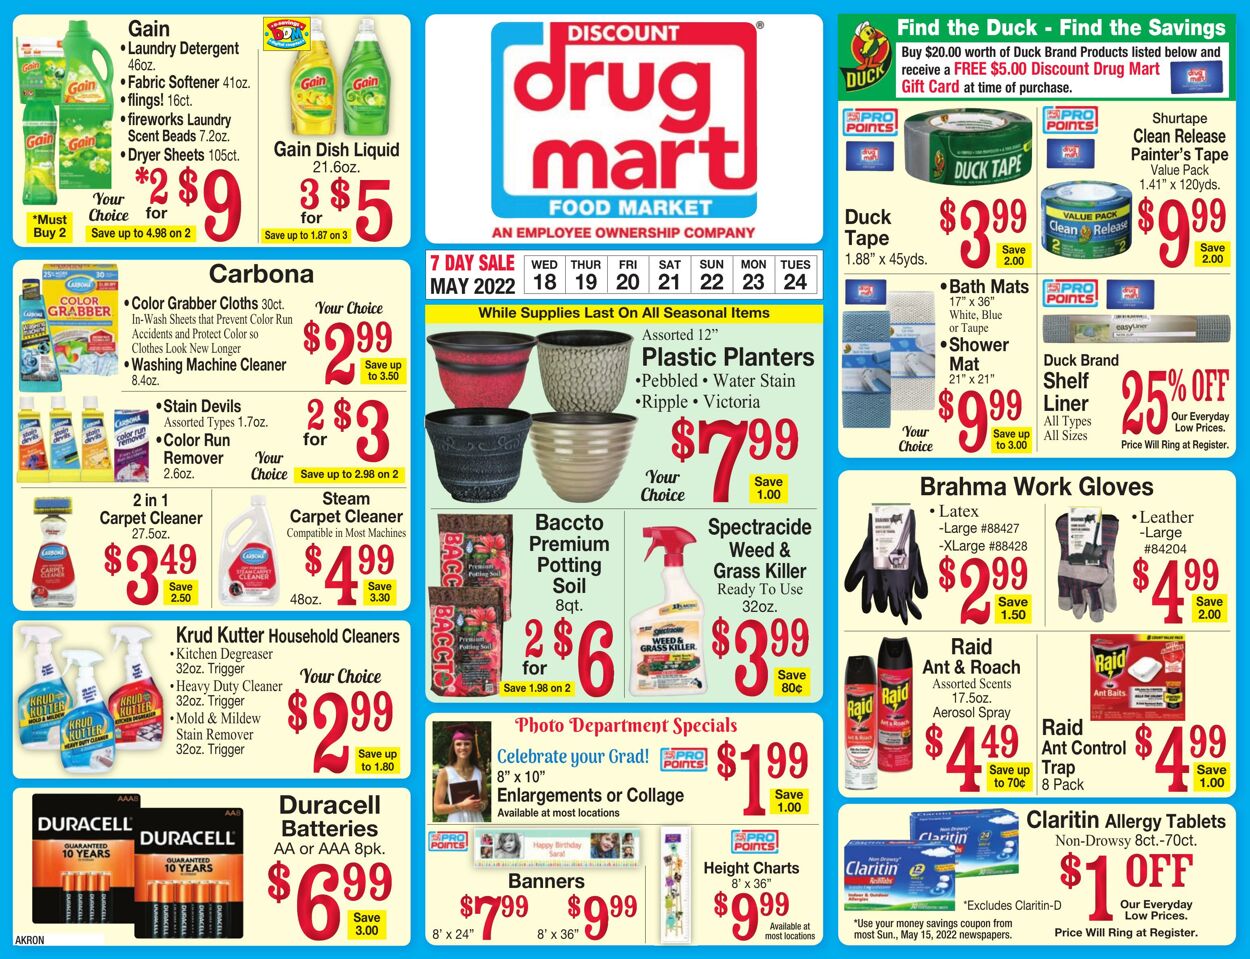 Discount Drug Mart Promotional weekly ads